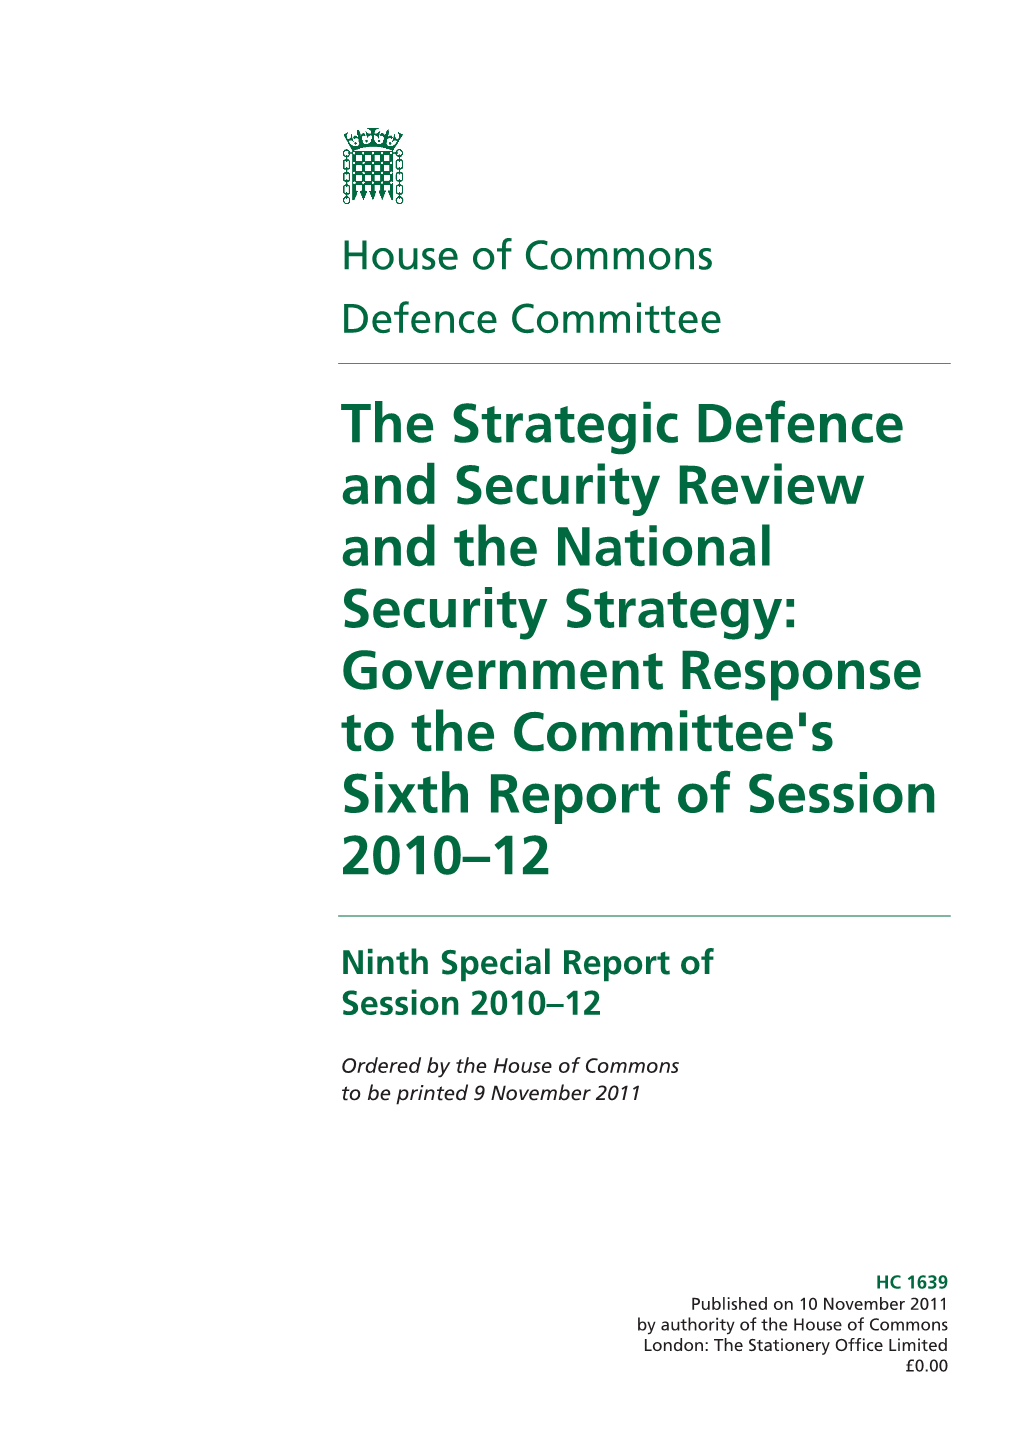 The Strategic Defence and Security Review and the National Security Strategy: Government Response to the Committee's Sixth Report of Session 2010–12